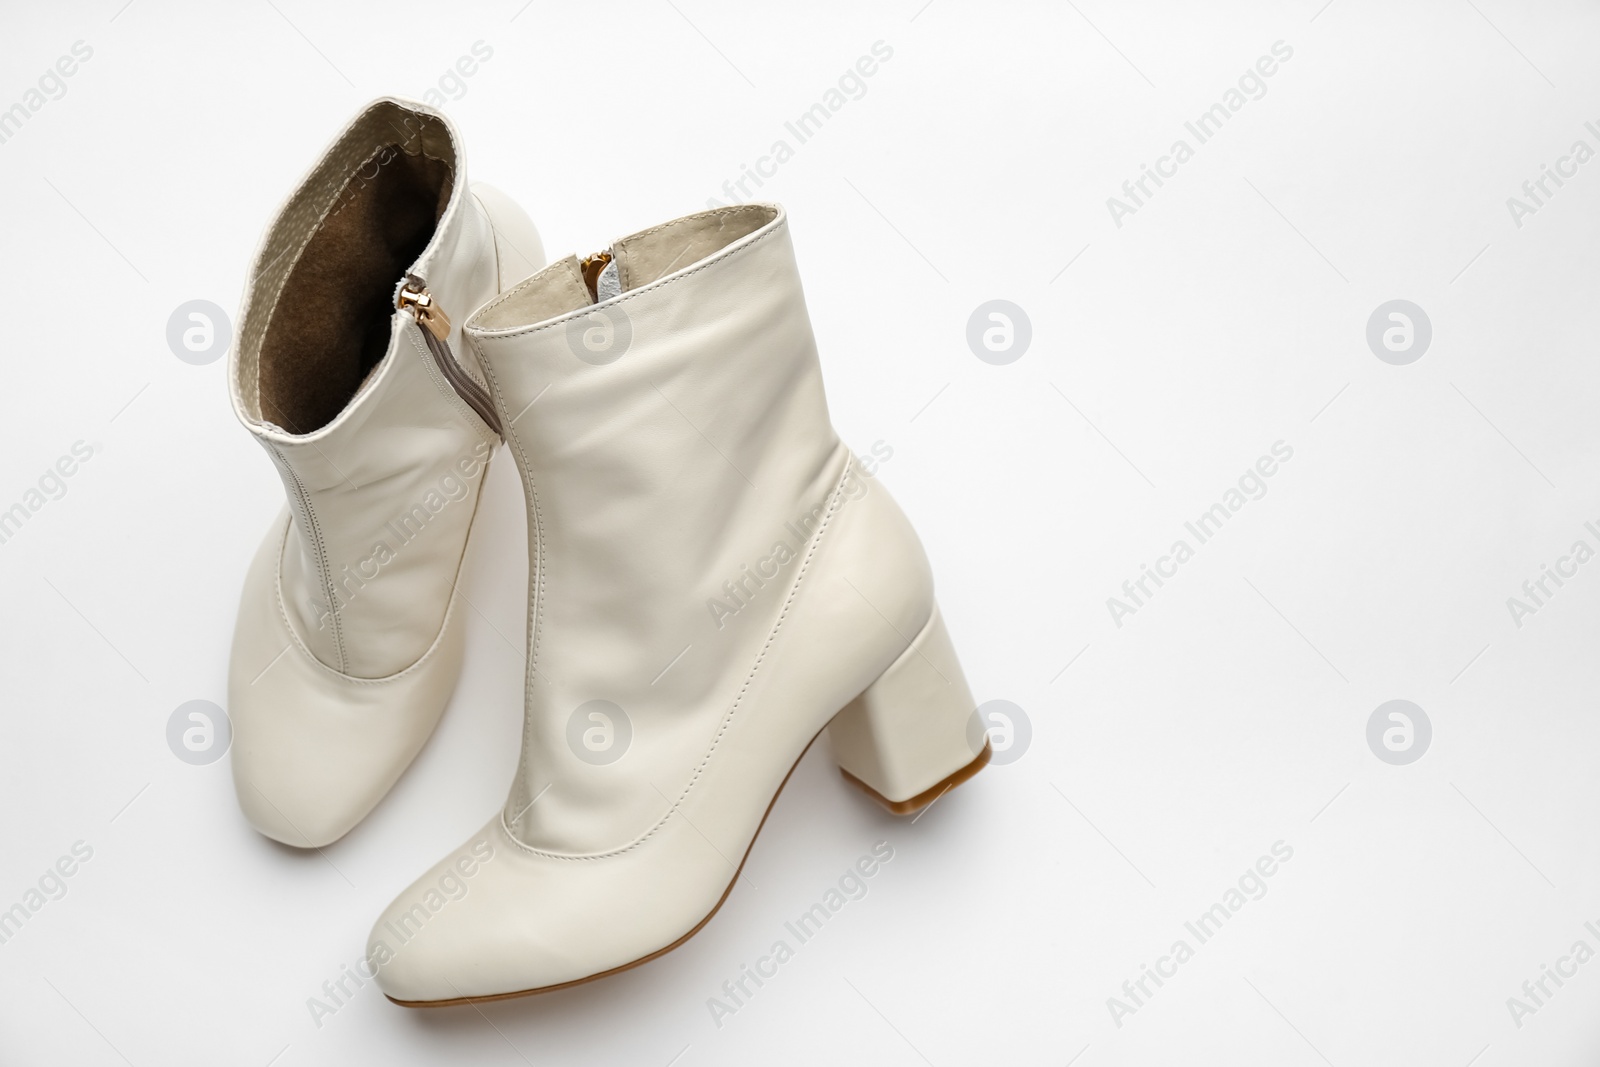 Photo of Pair of stylish leather shoes on white background, above view